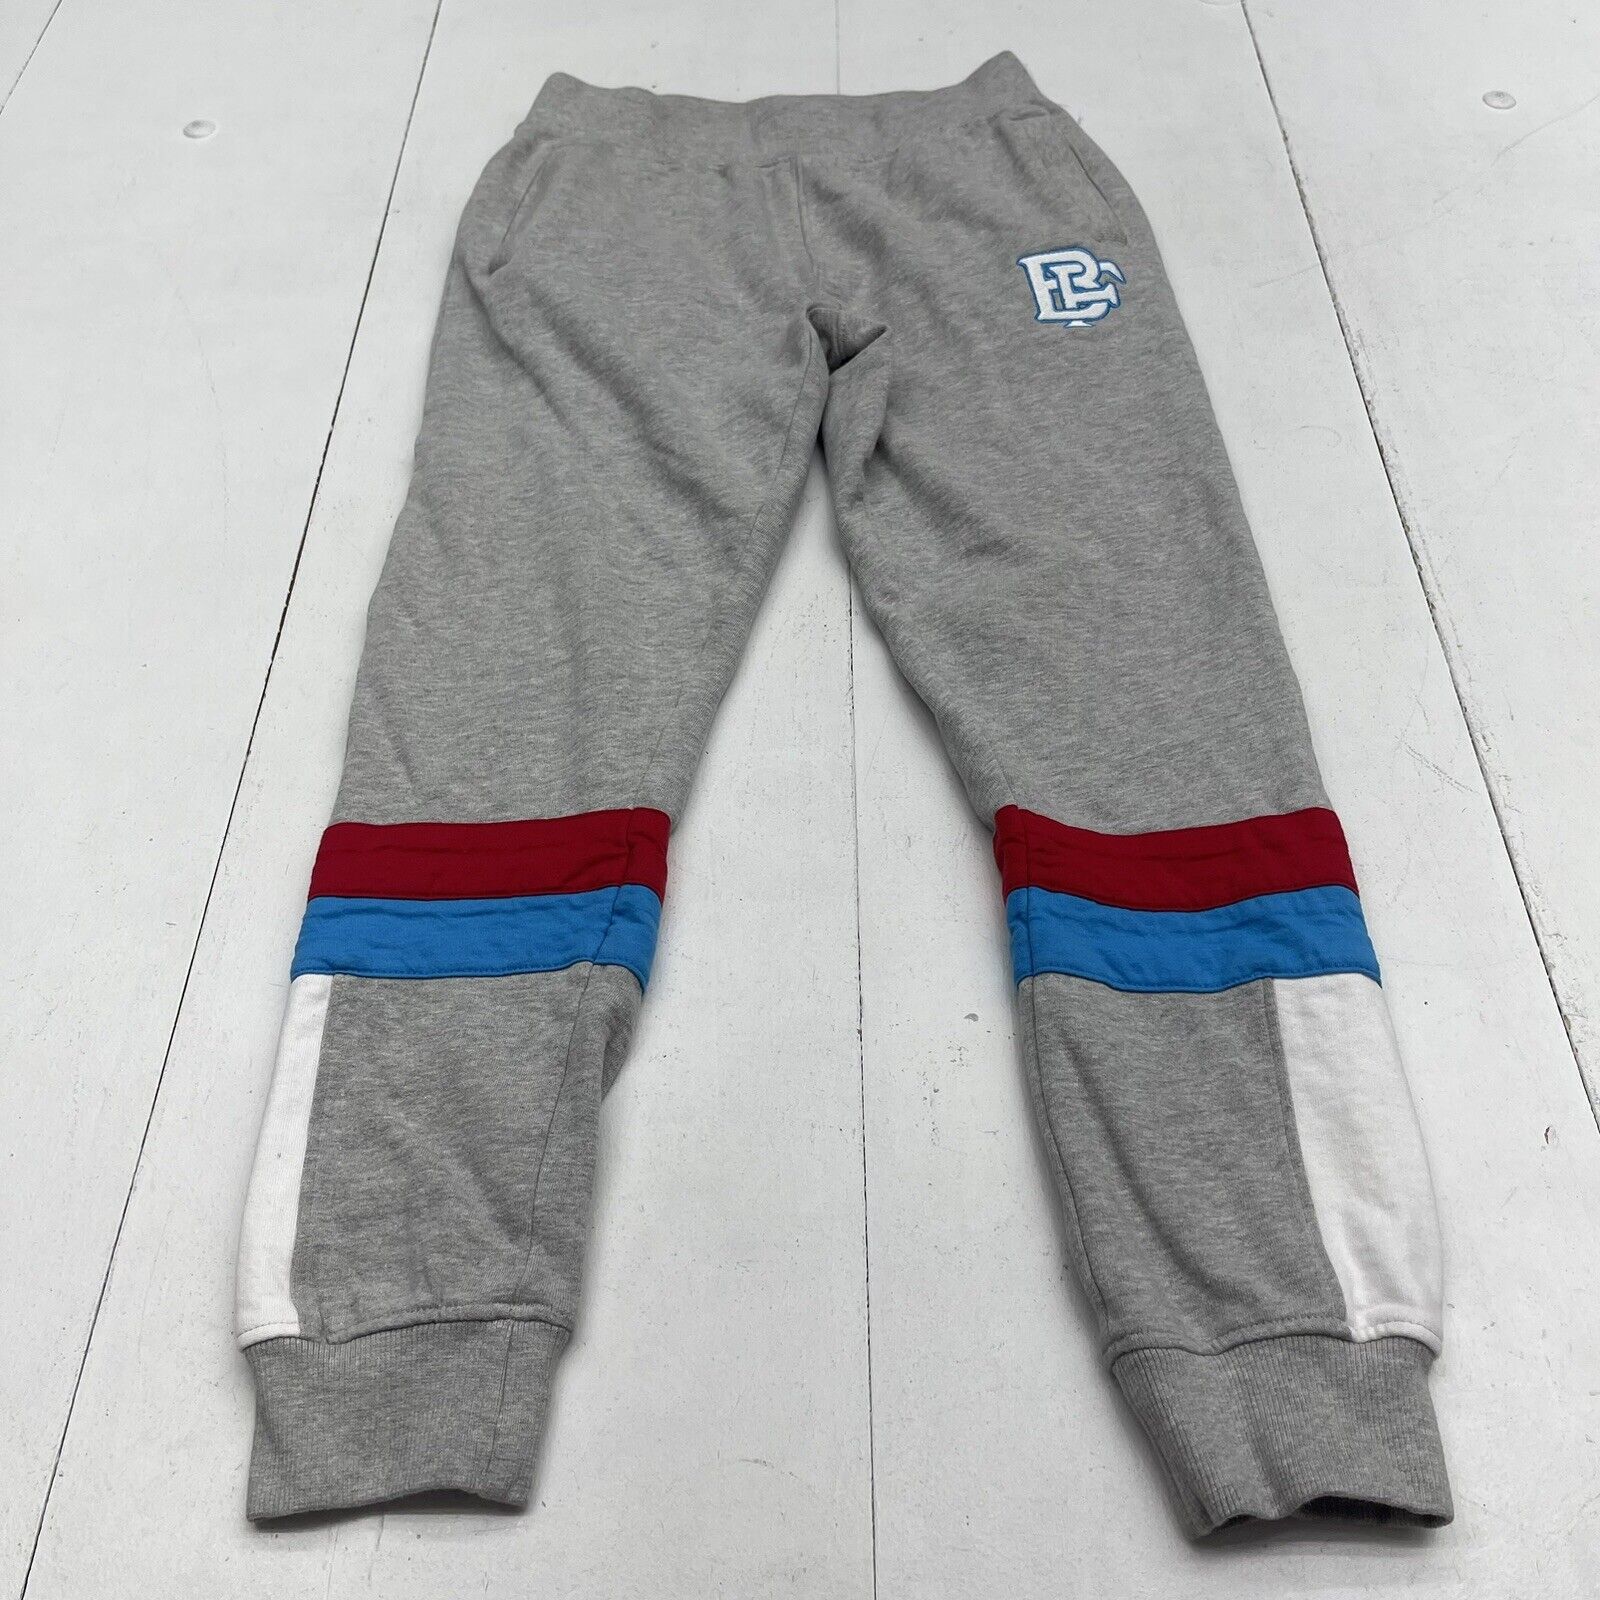 Born Fly Grey Sweatpant Joggers Youth Boys Size Large New